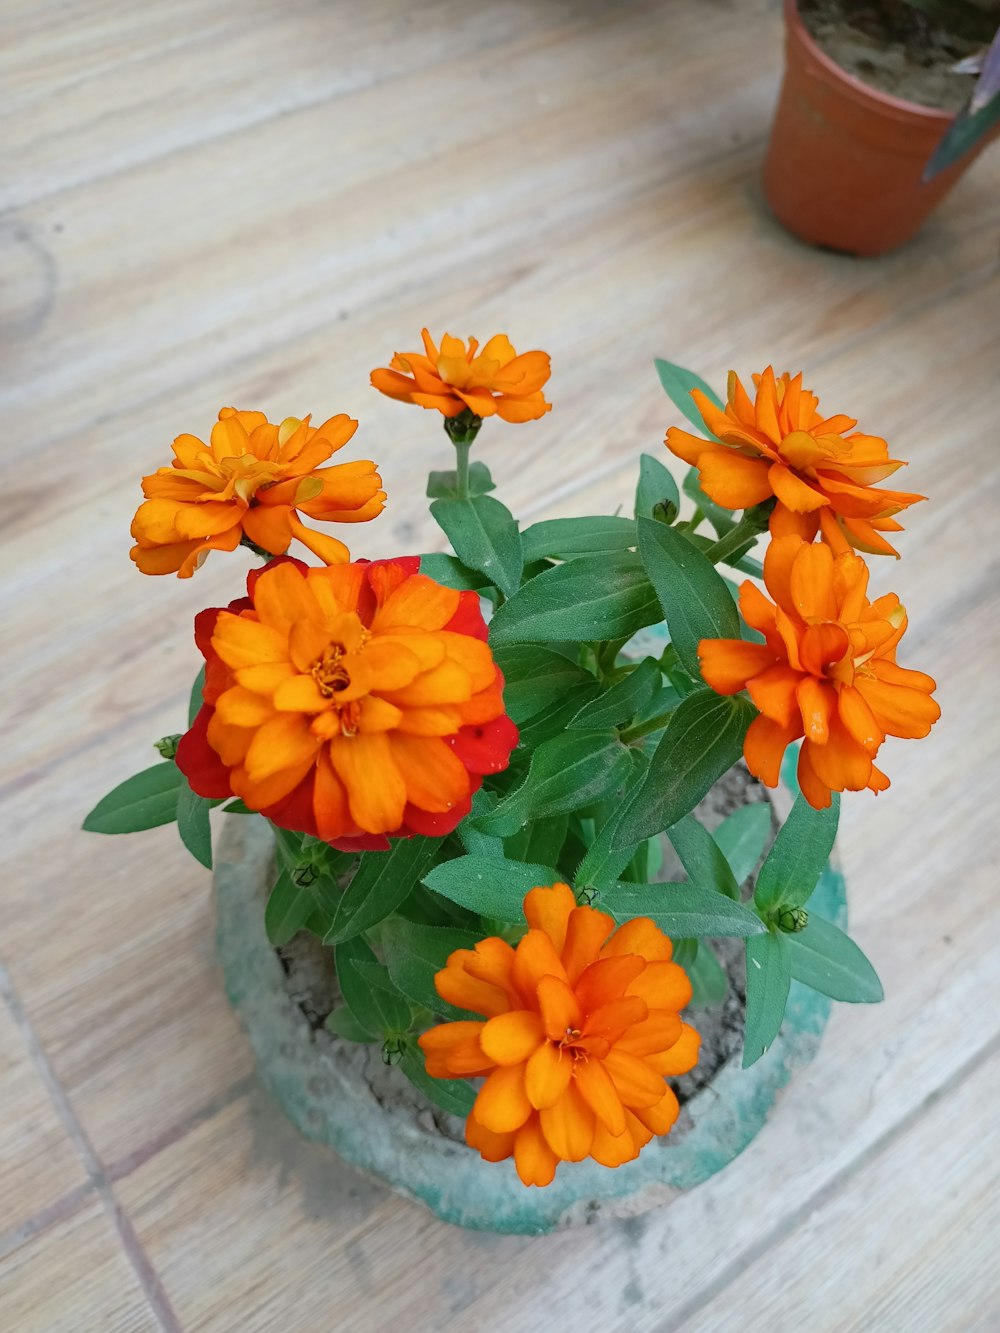 a potted plant with orange flowers on a wooden floor